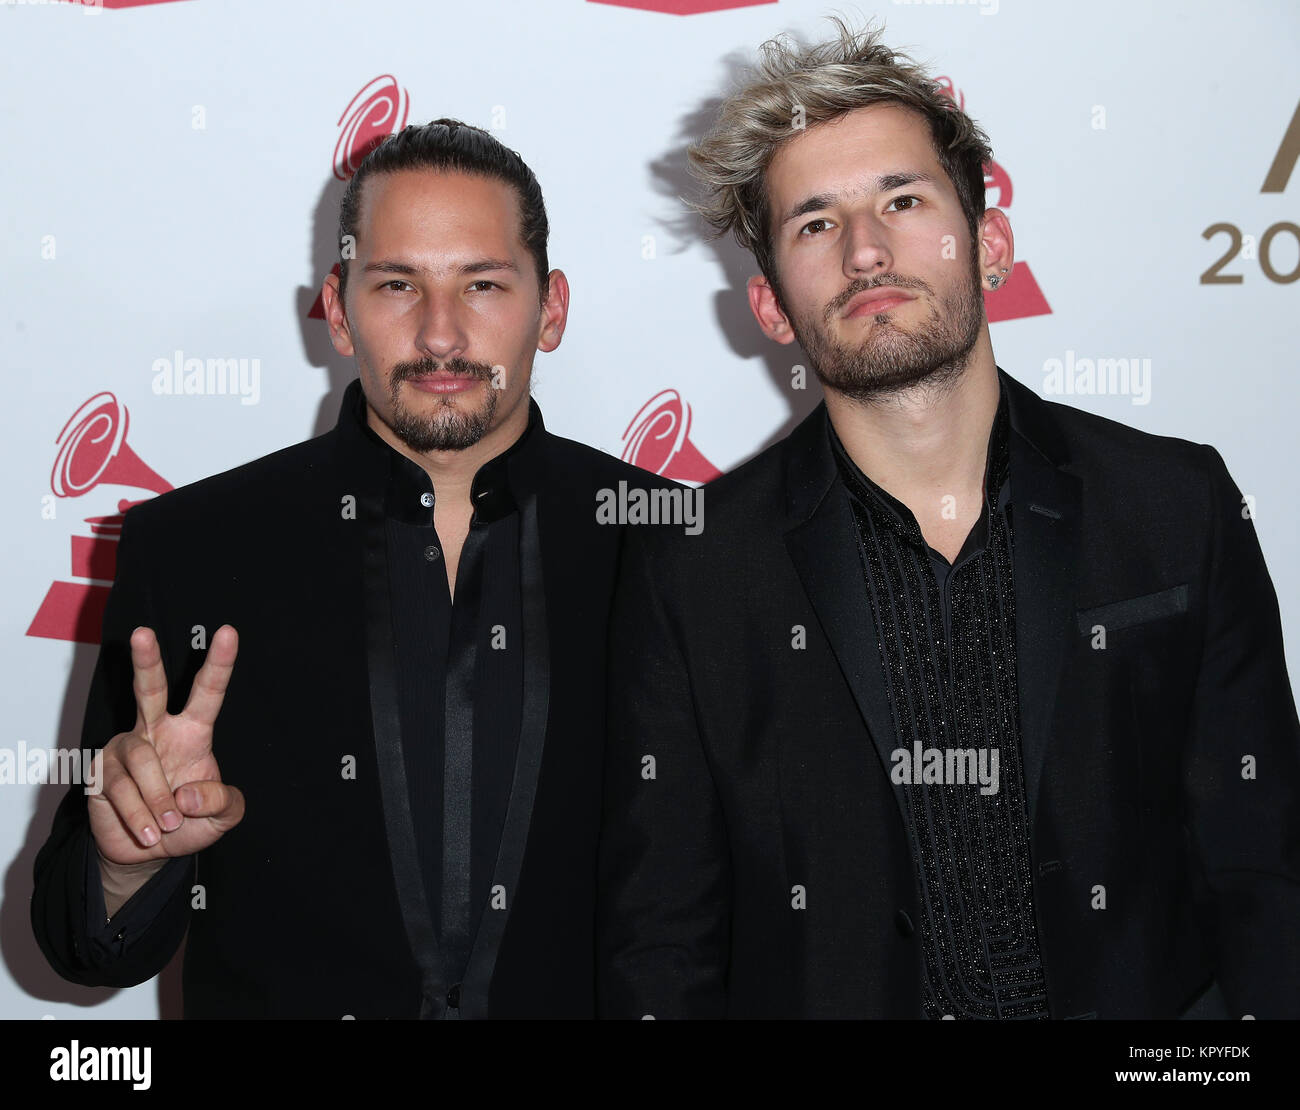 The Latin Recording Academy Person of The Year Gala Honoring Alejandro Sanz at Mandalay Bay Convention Center  Featuring: Mau y Ricky Where: Las Vegas, Nevada, United States When: 15 Nov 2017 Credit: Judy Eddy/WENN.com Stock Photo